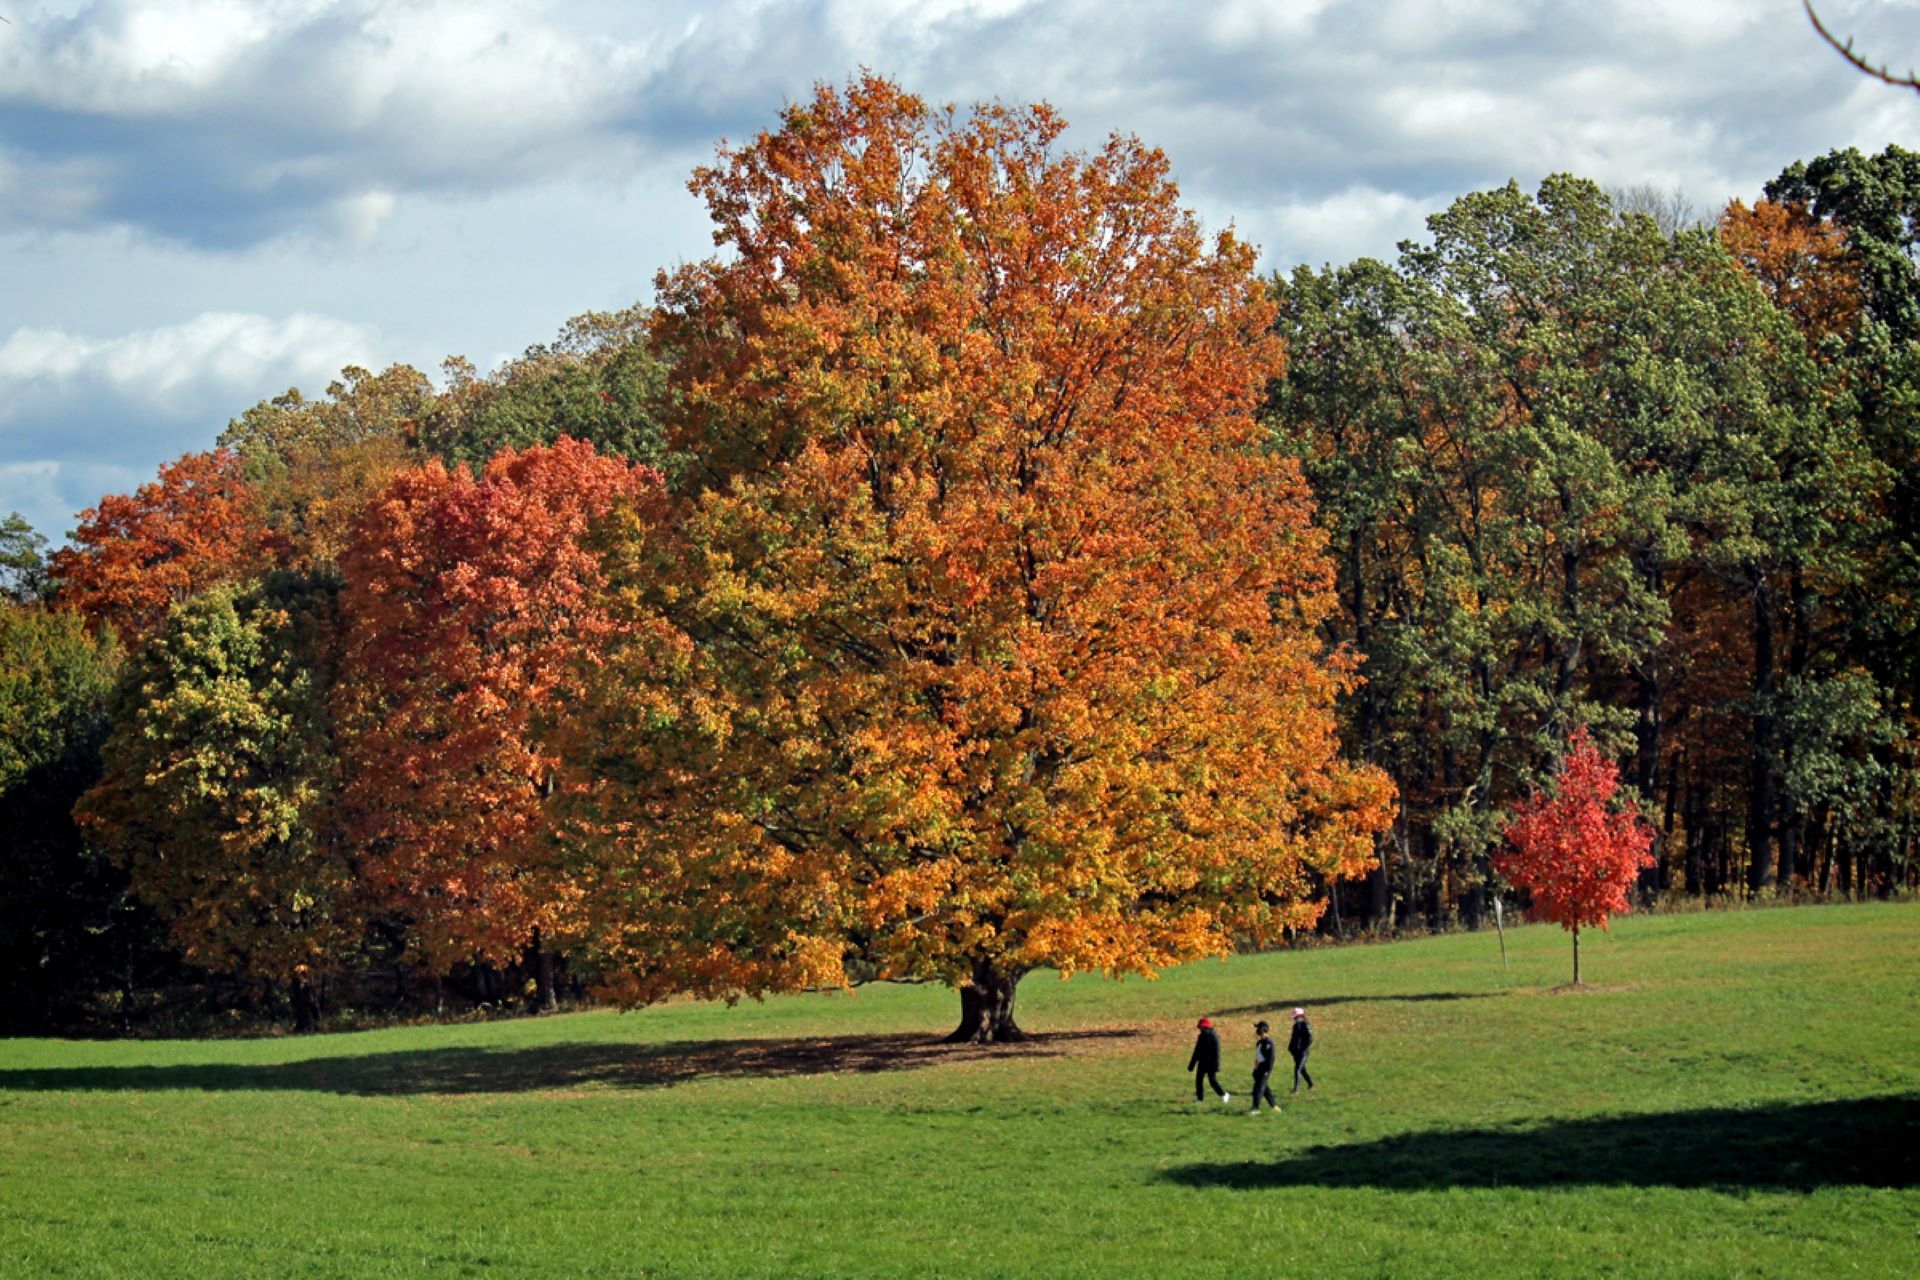 Visitors walk across the changing landscape of the Arboretum in early Fall.